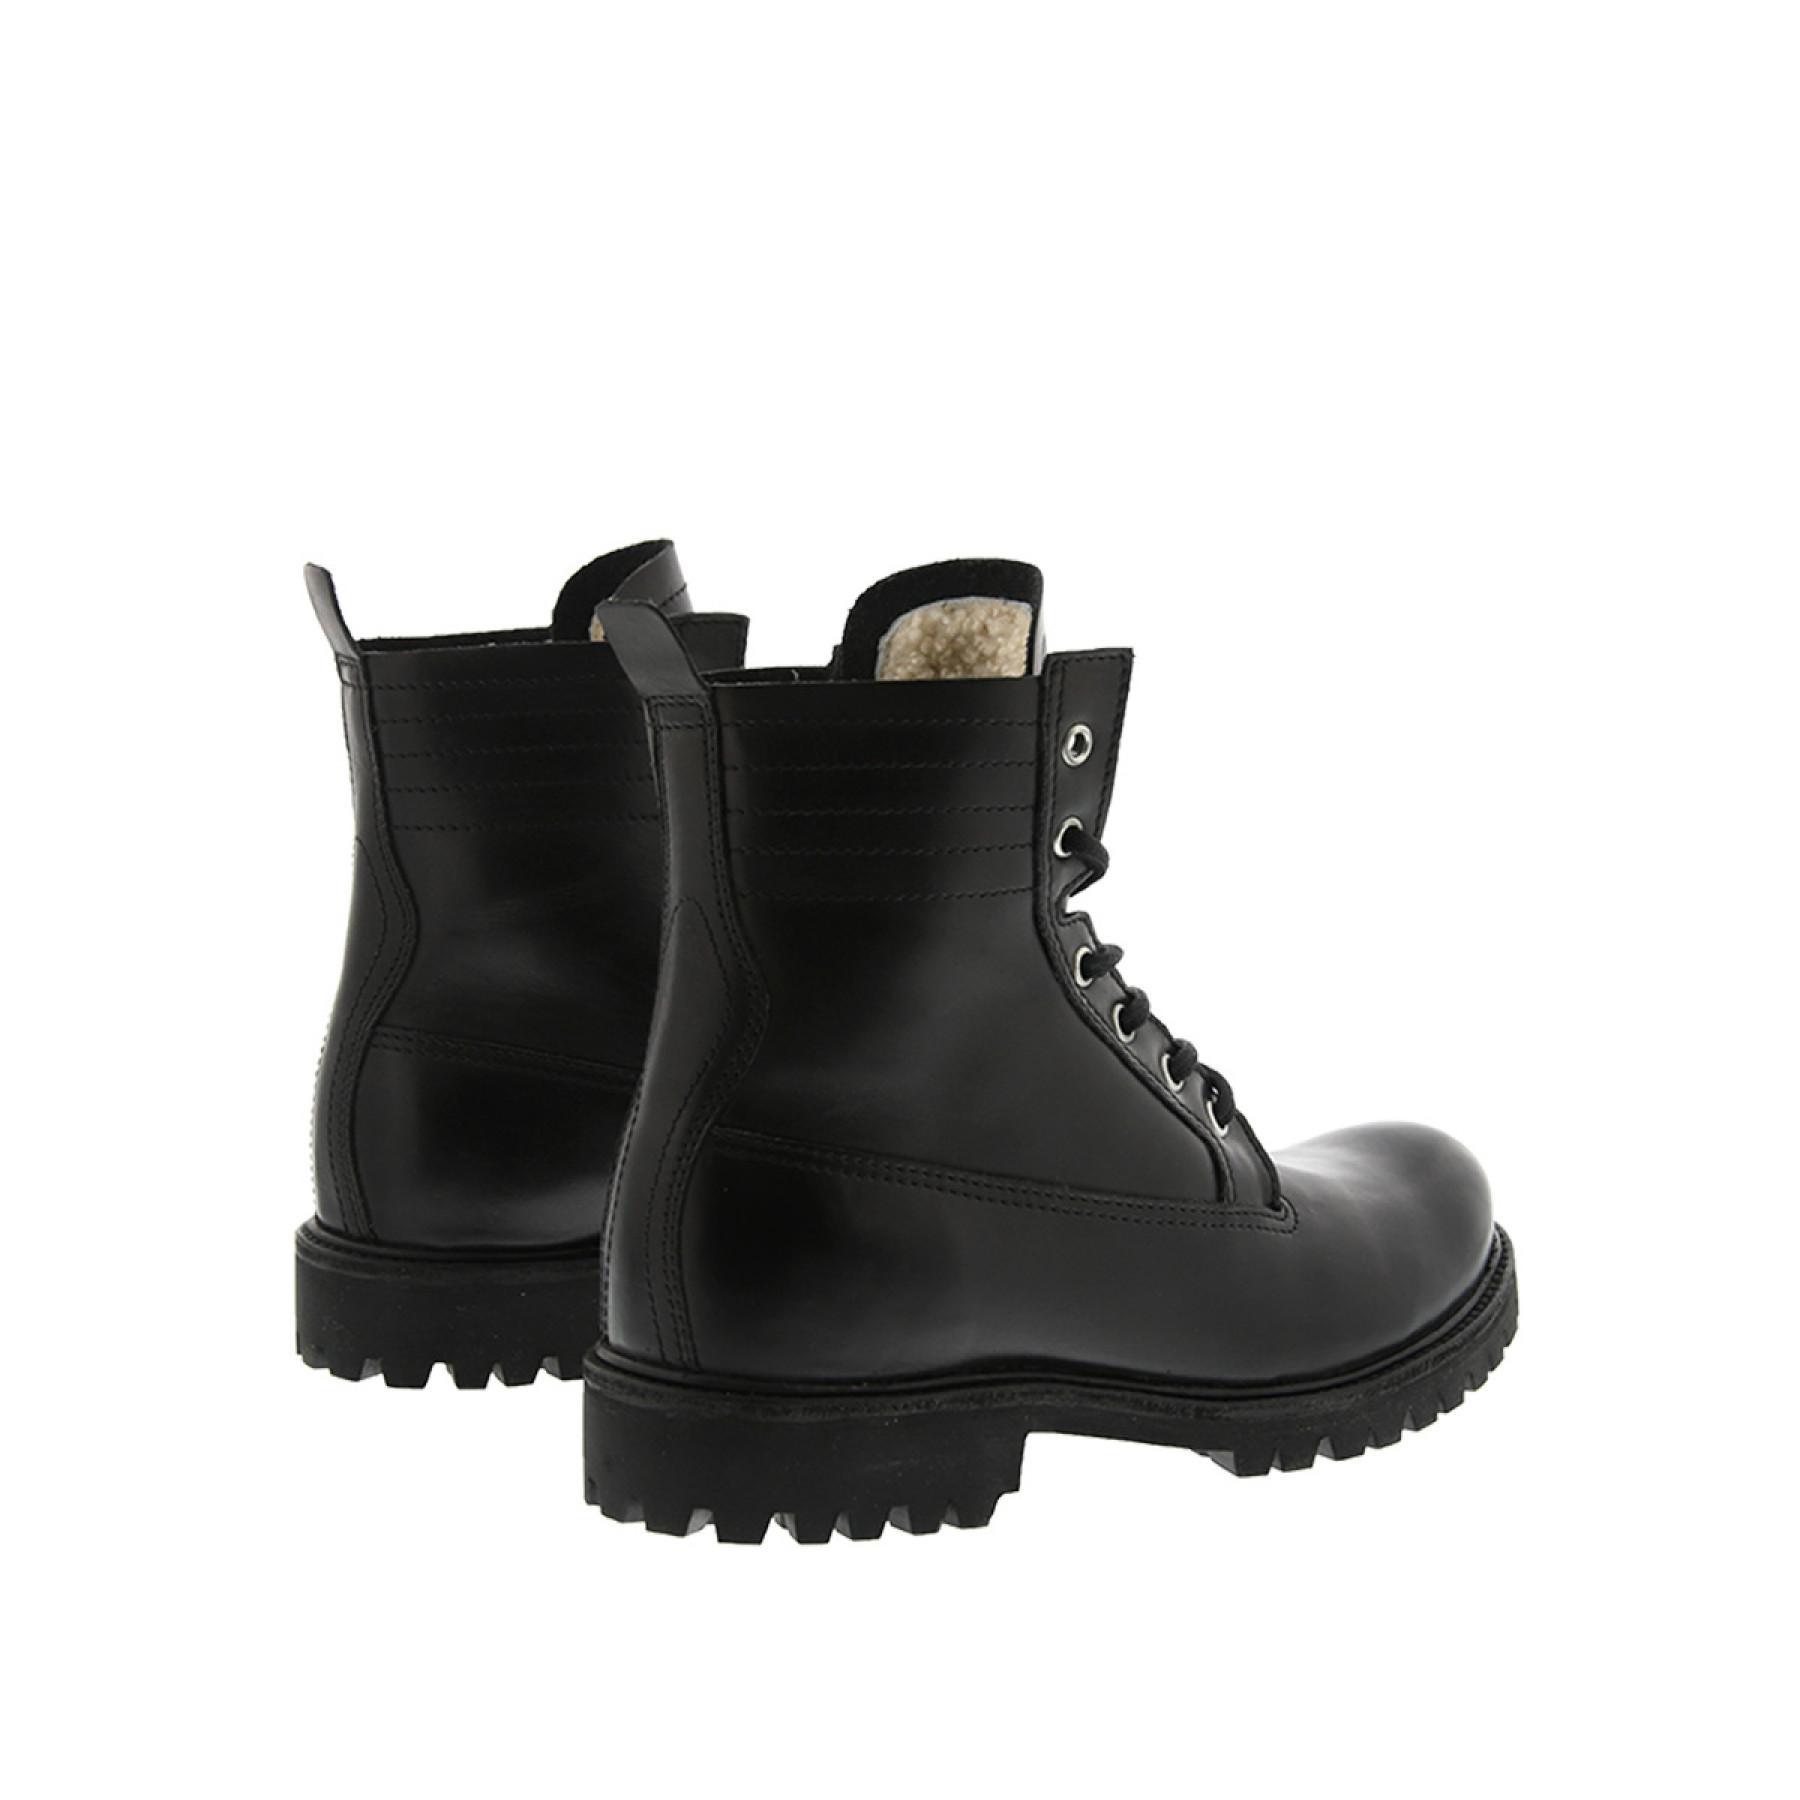 Leather boots for women Blackstone SL82